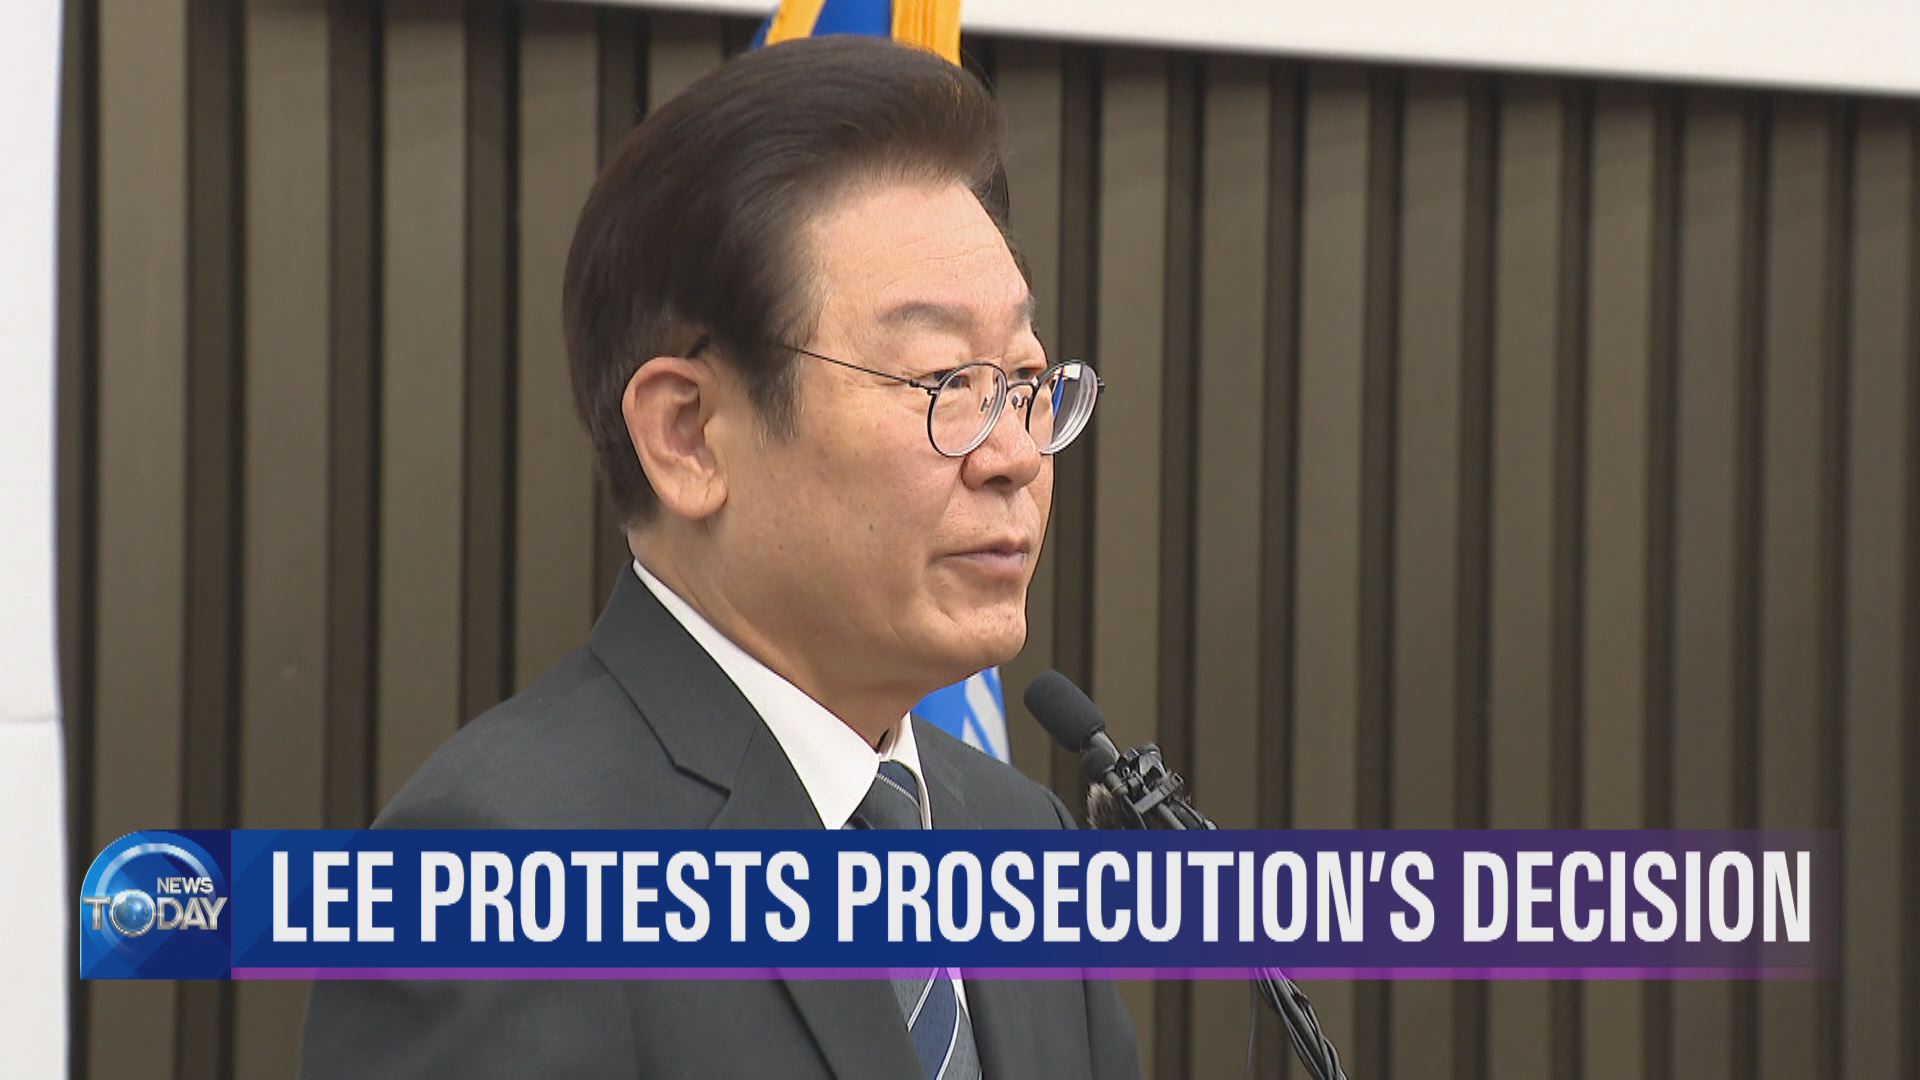 LEE PROTESTS PROSECUTION'S DECISION